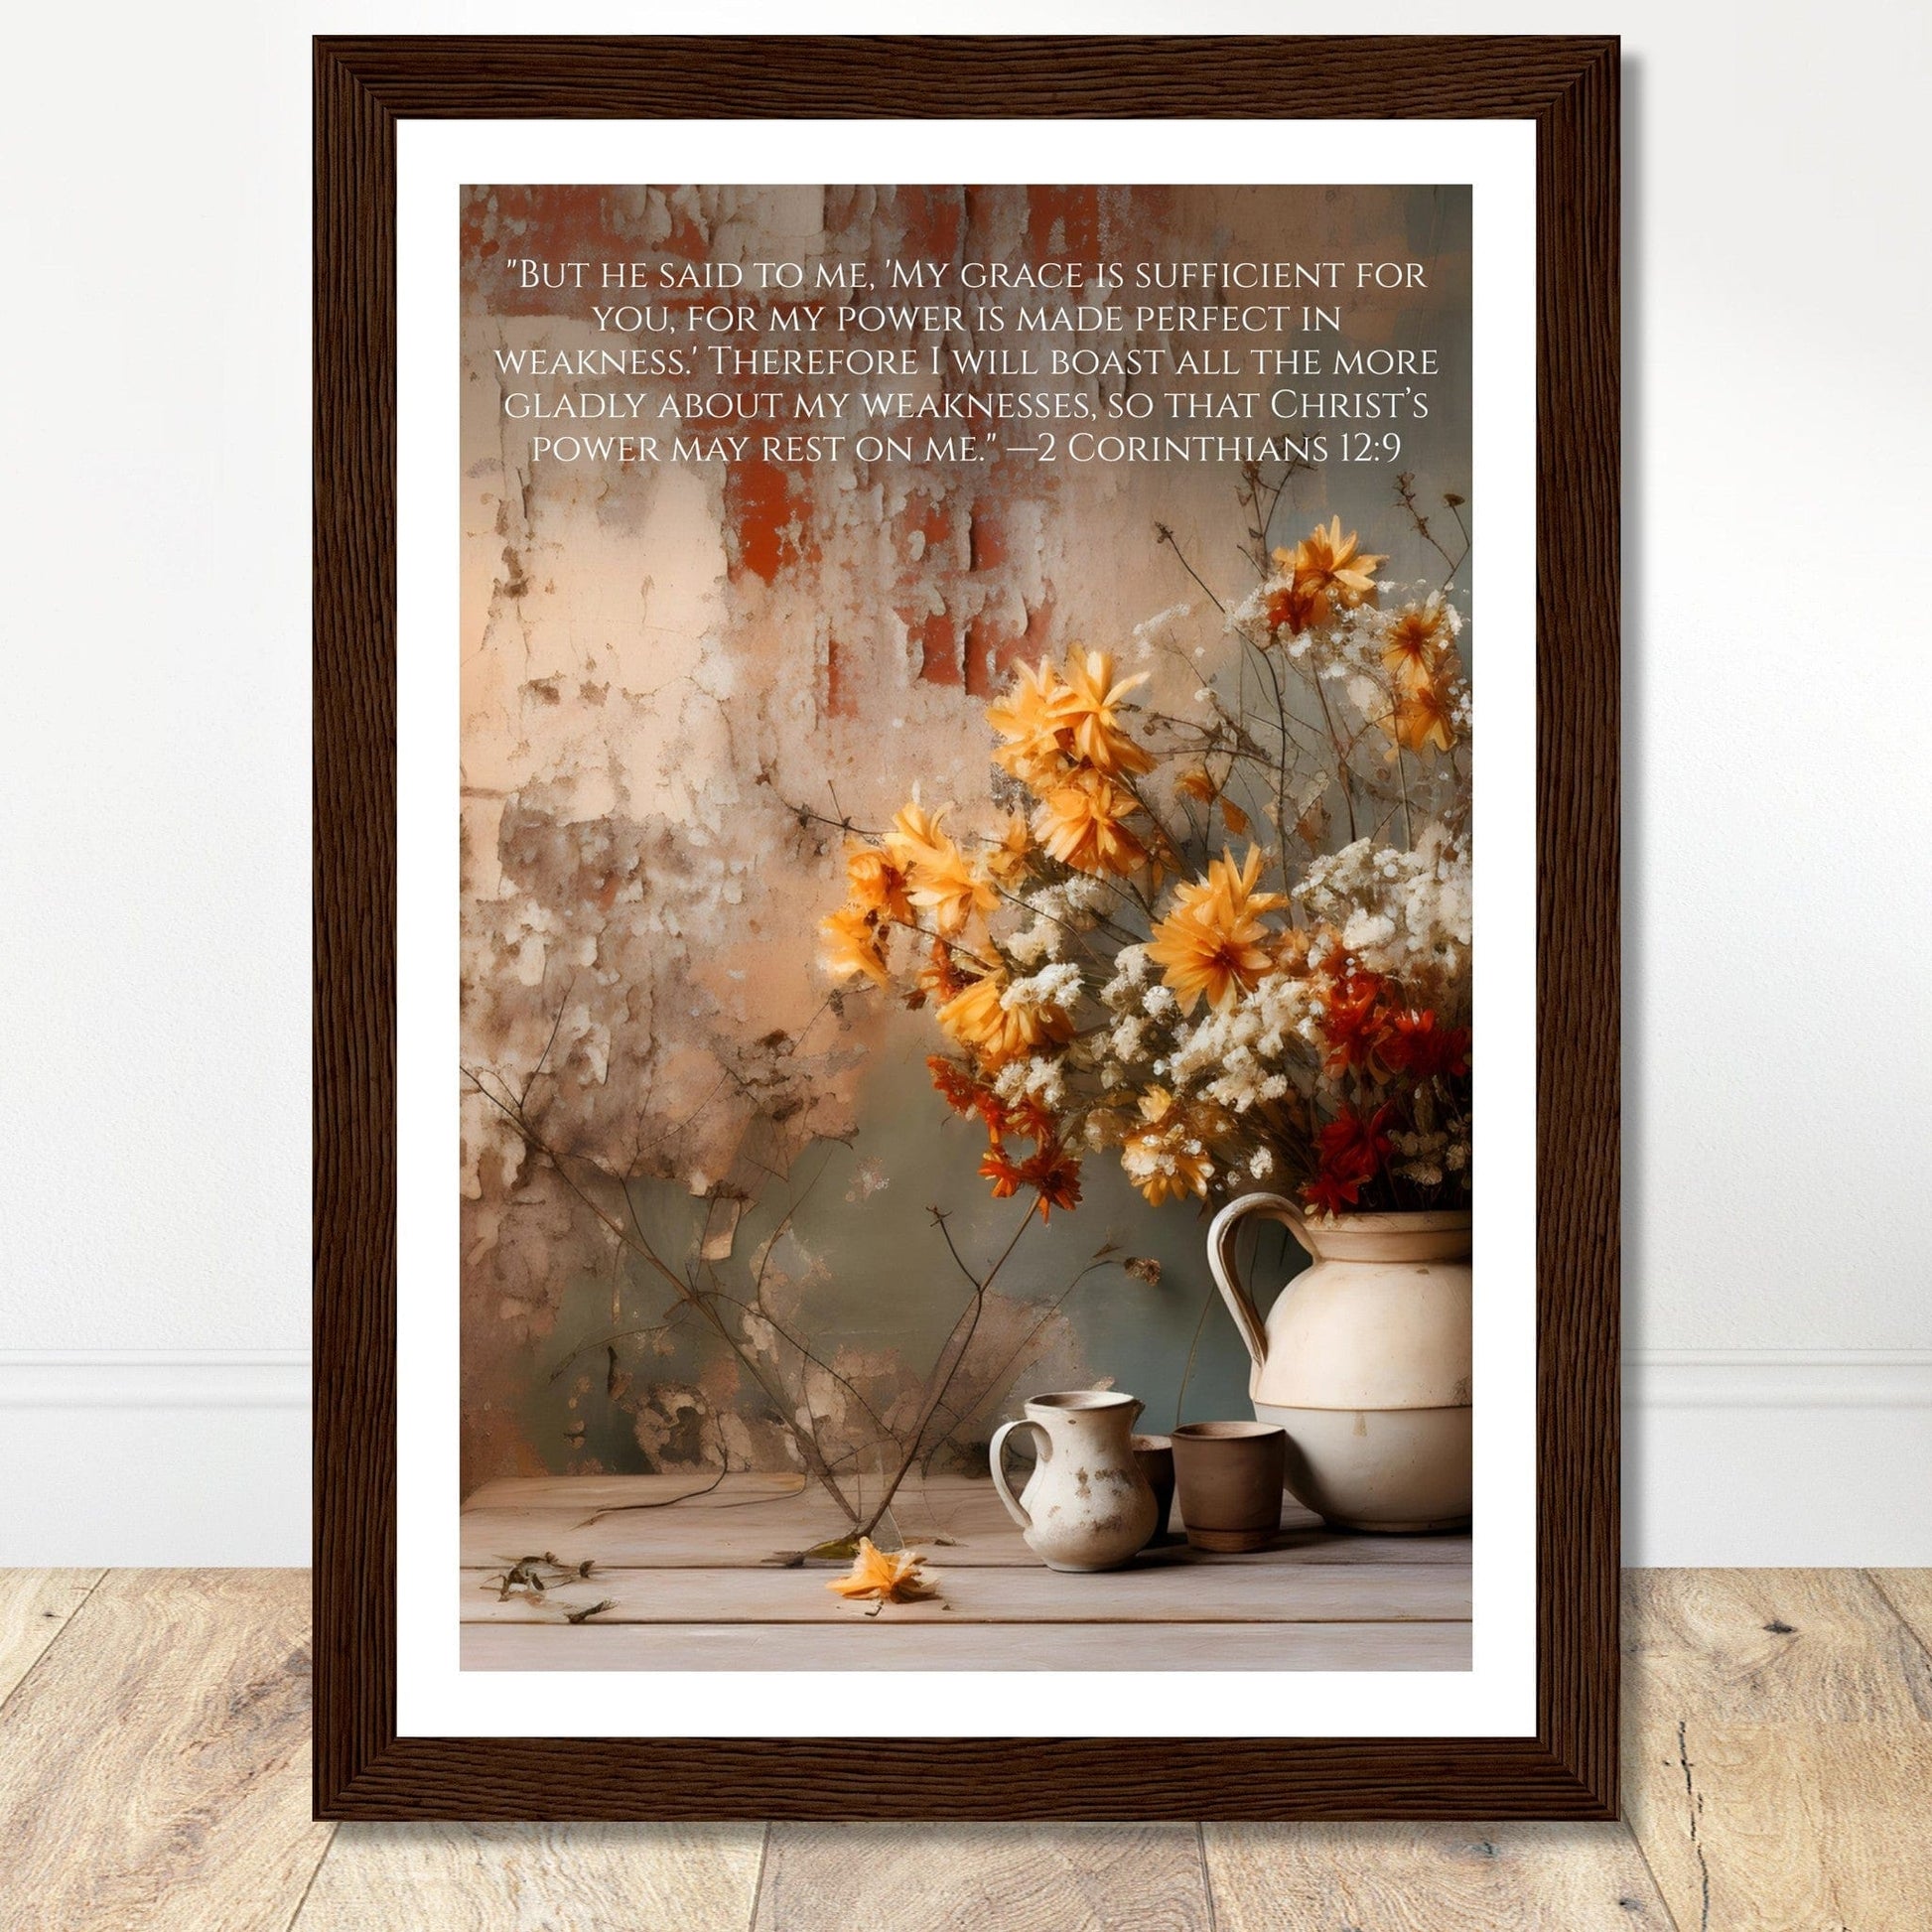 Coffee With My Father Print Material A4 21x29.7 cm / 8x12″ / Dark wood frame Framed Template